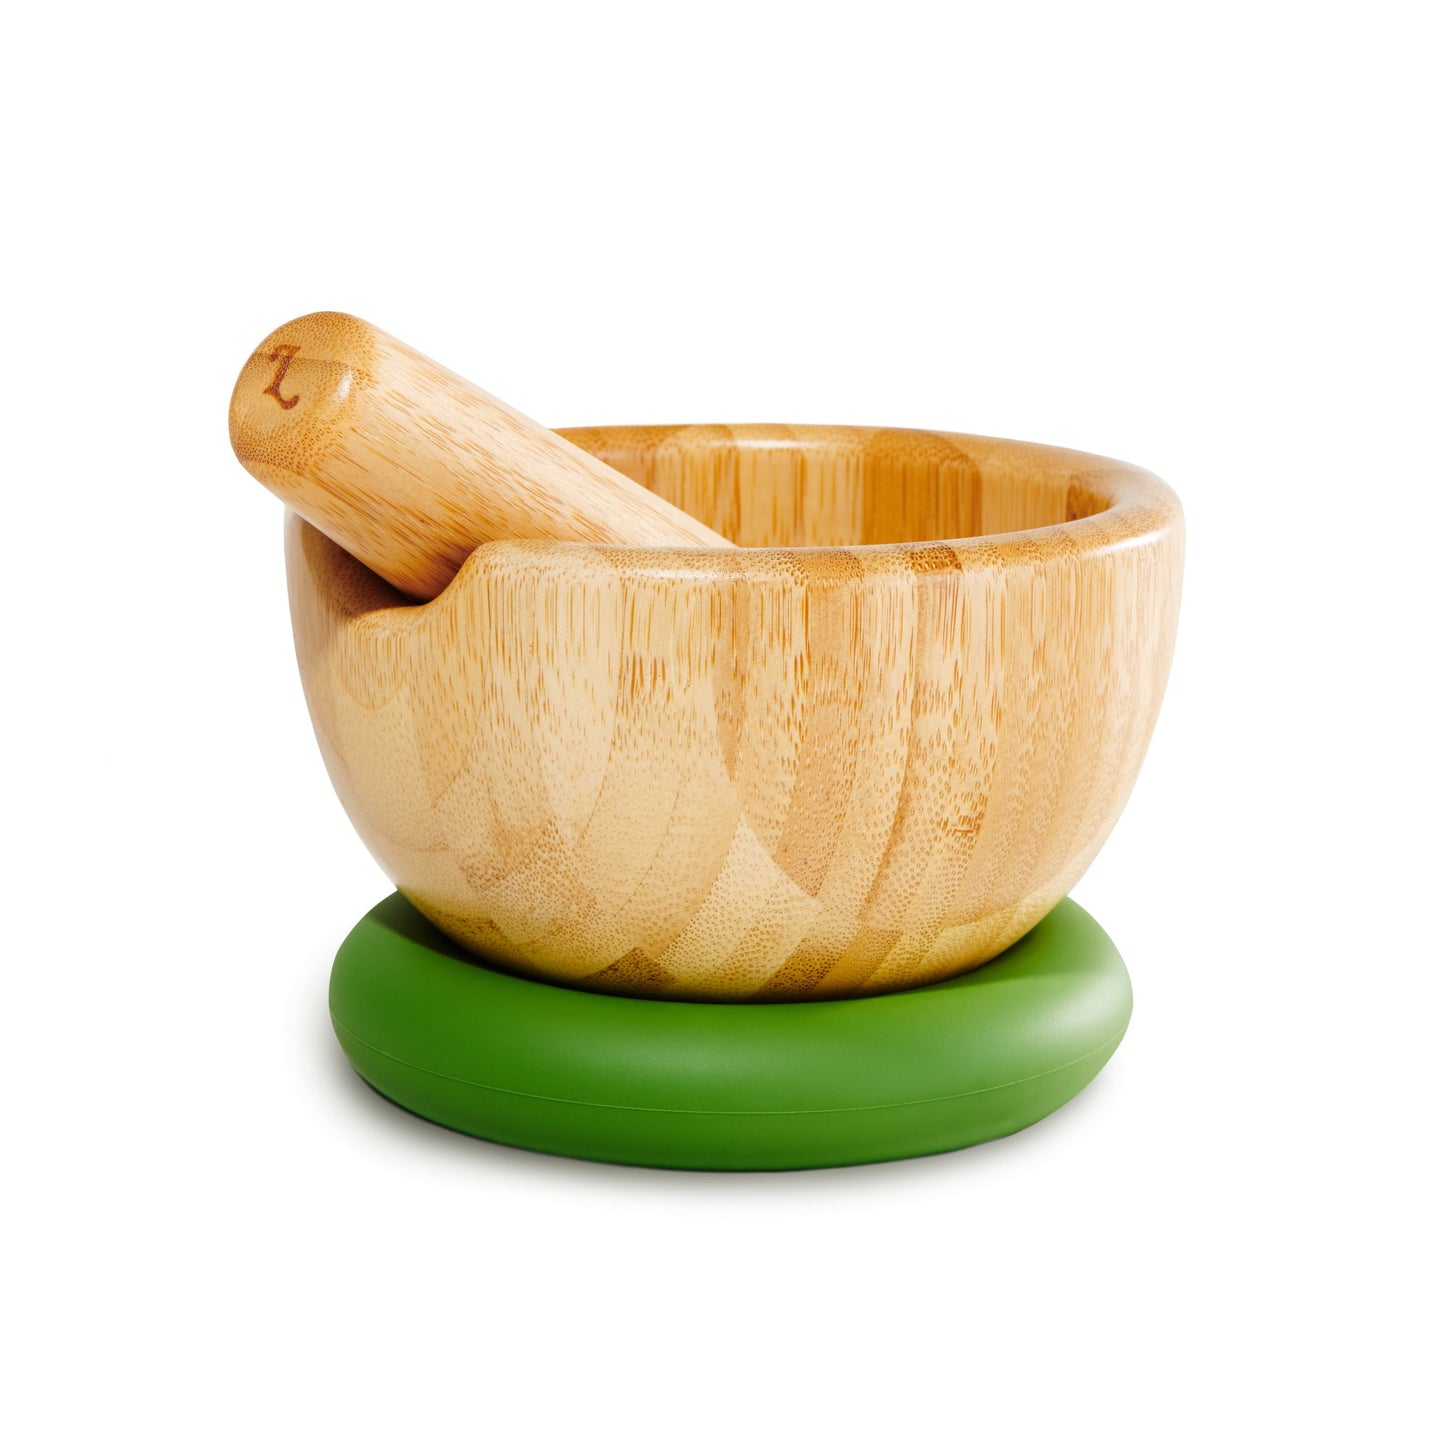 Mortar y Pestle - Bamboo - oh-eco